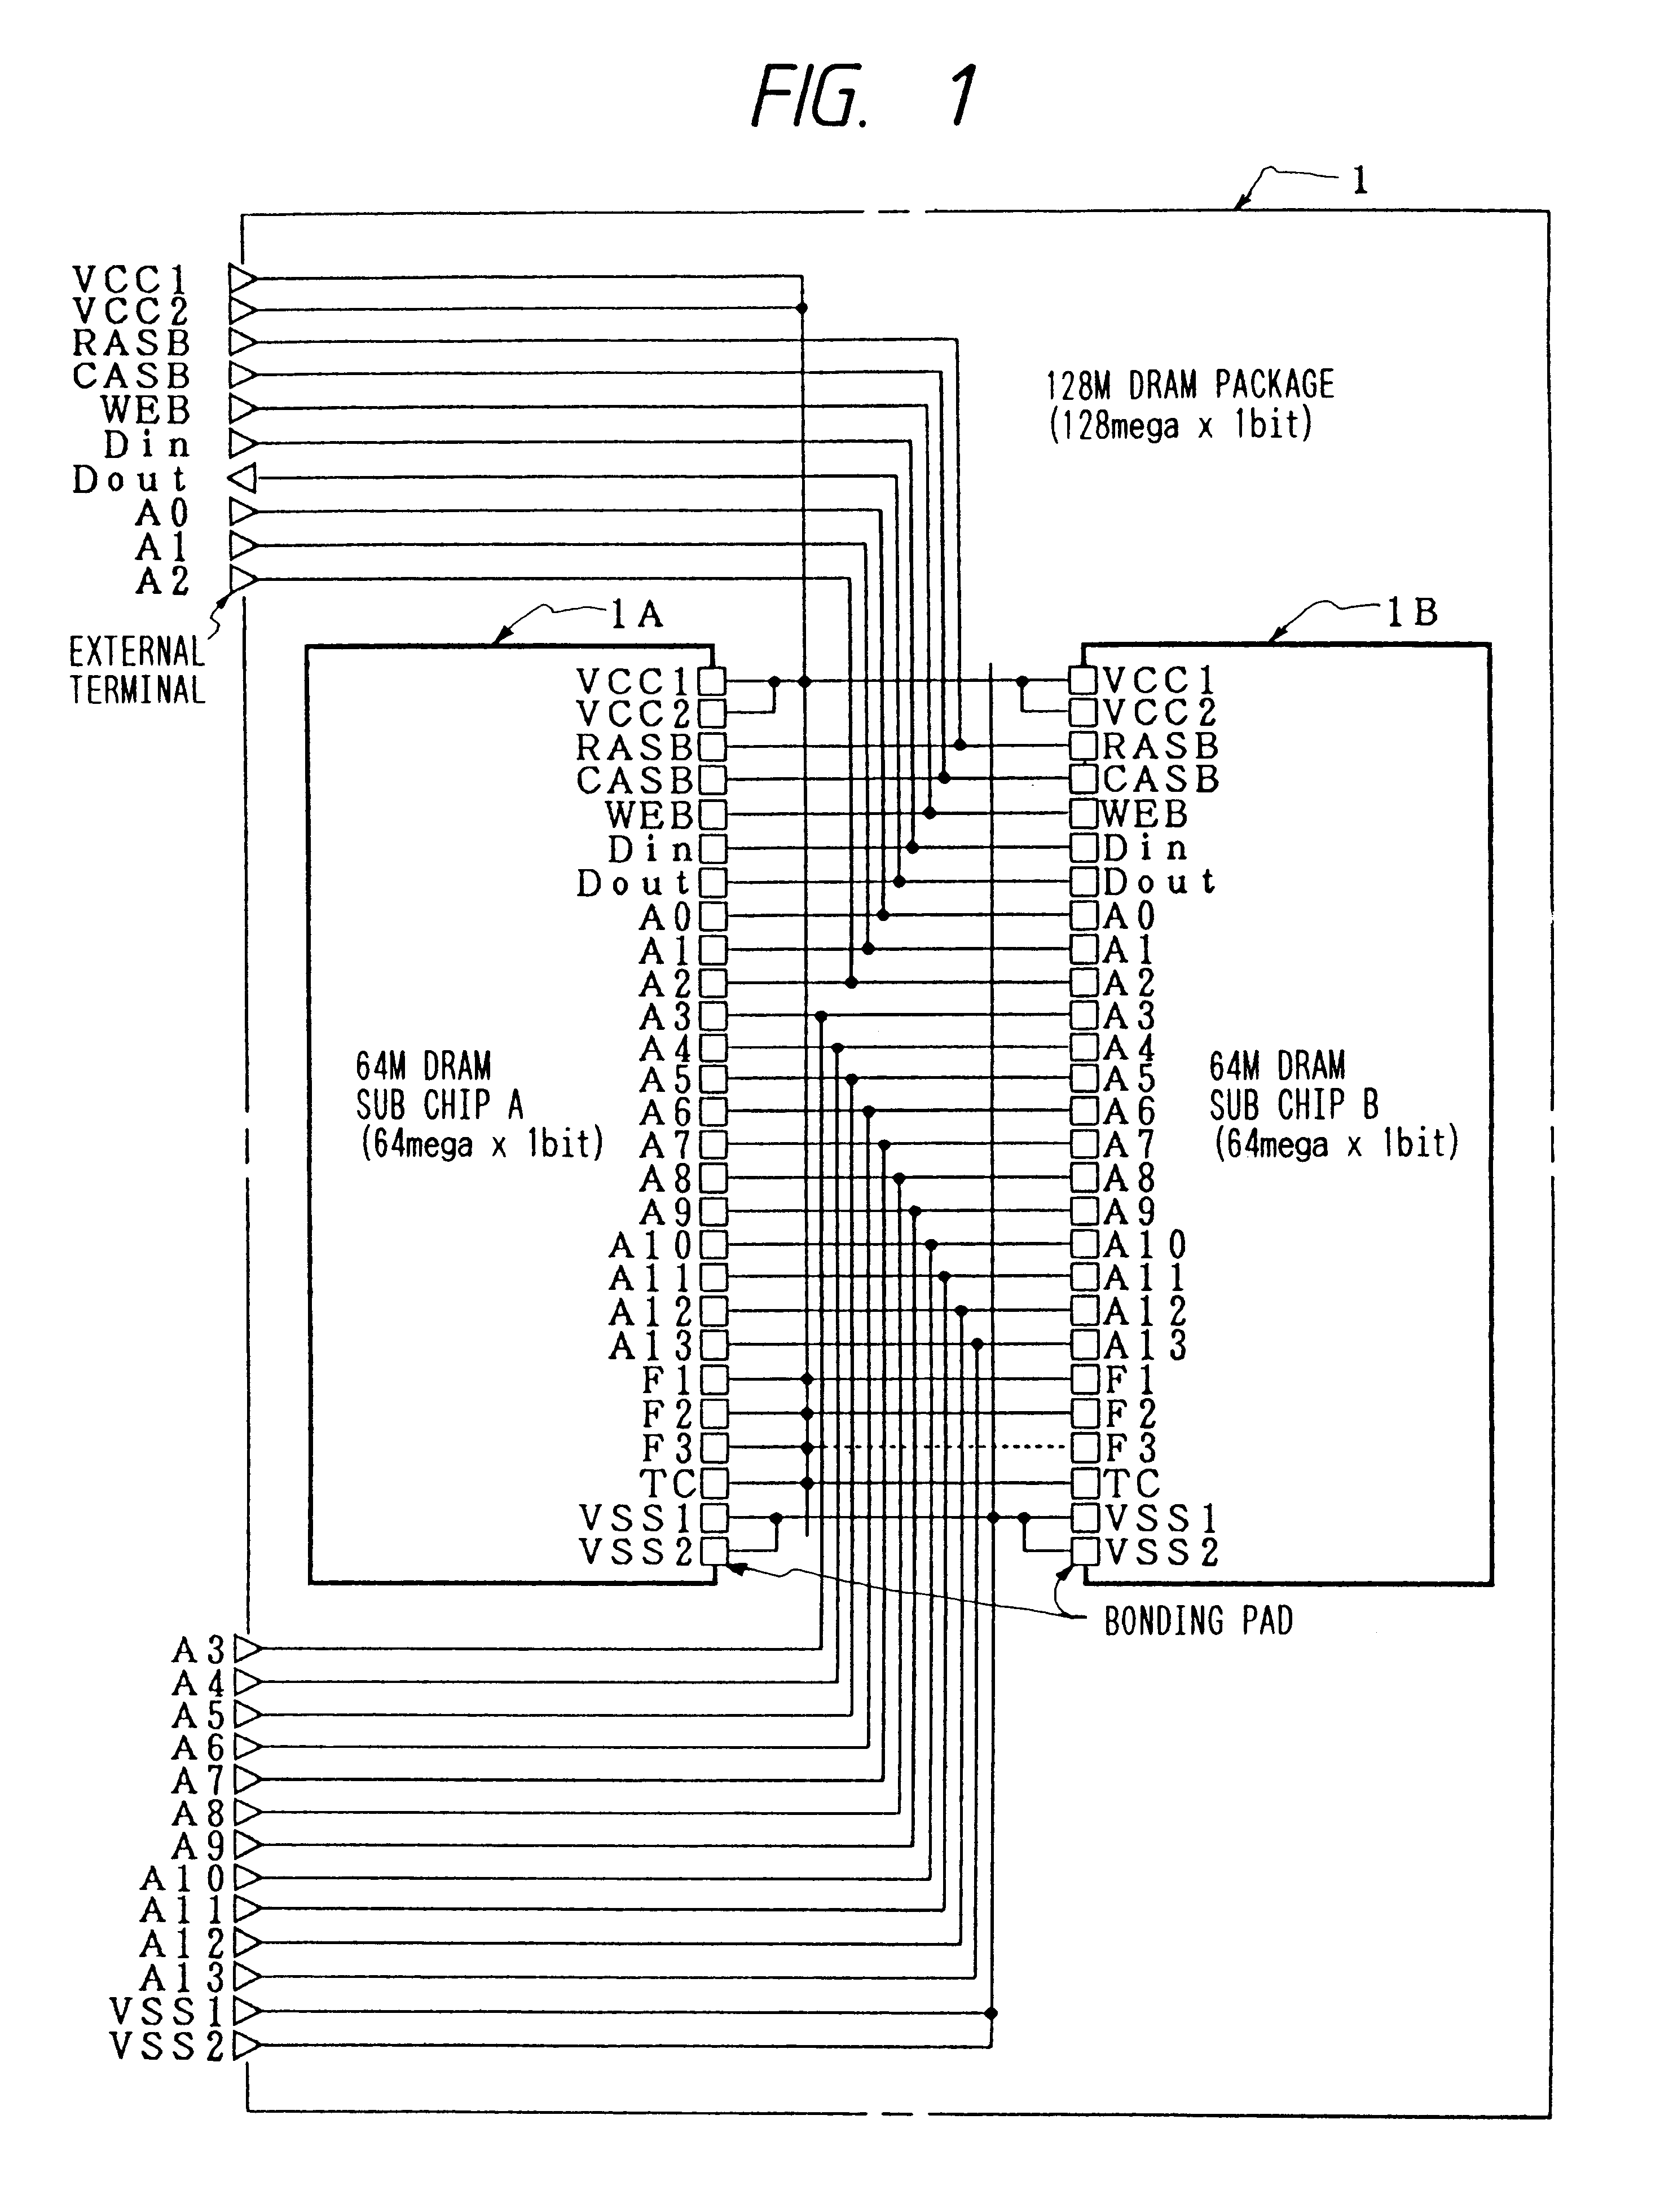 Sealed stacked arrangement of semiconductor devices